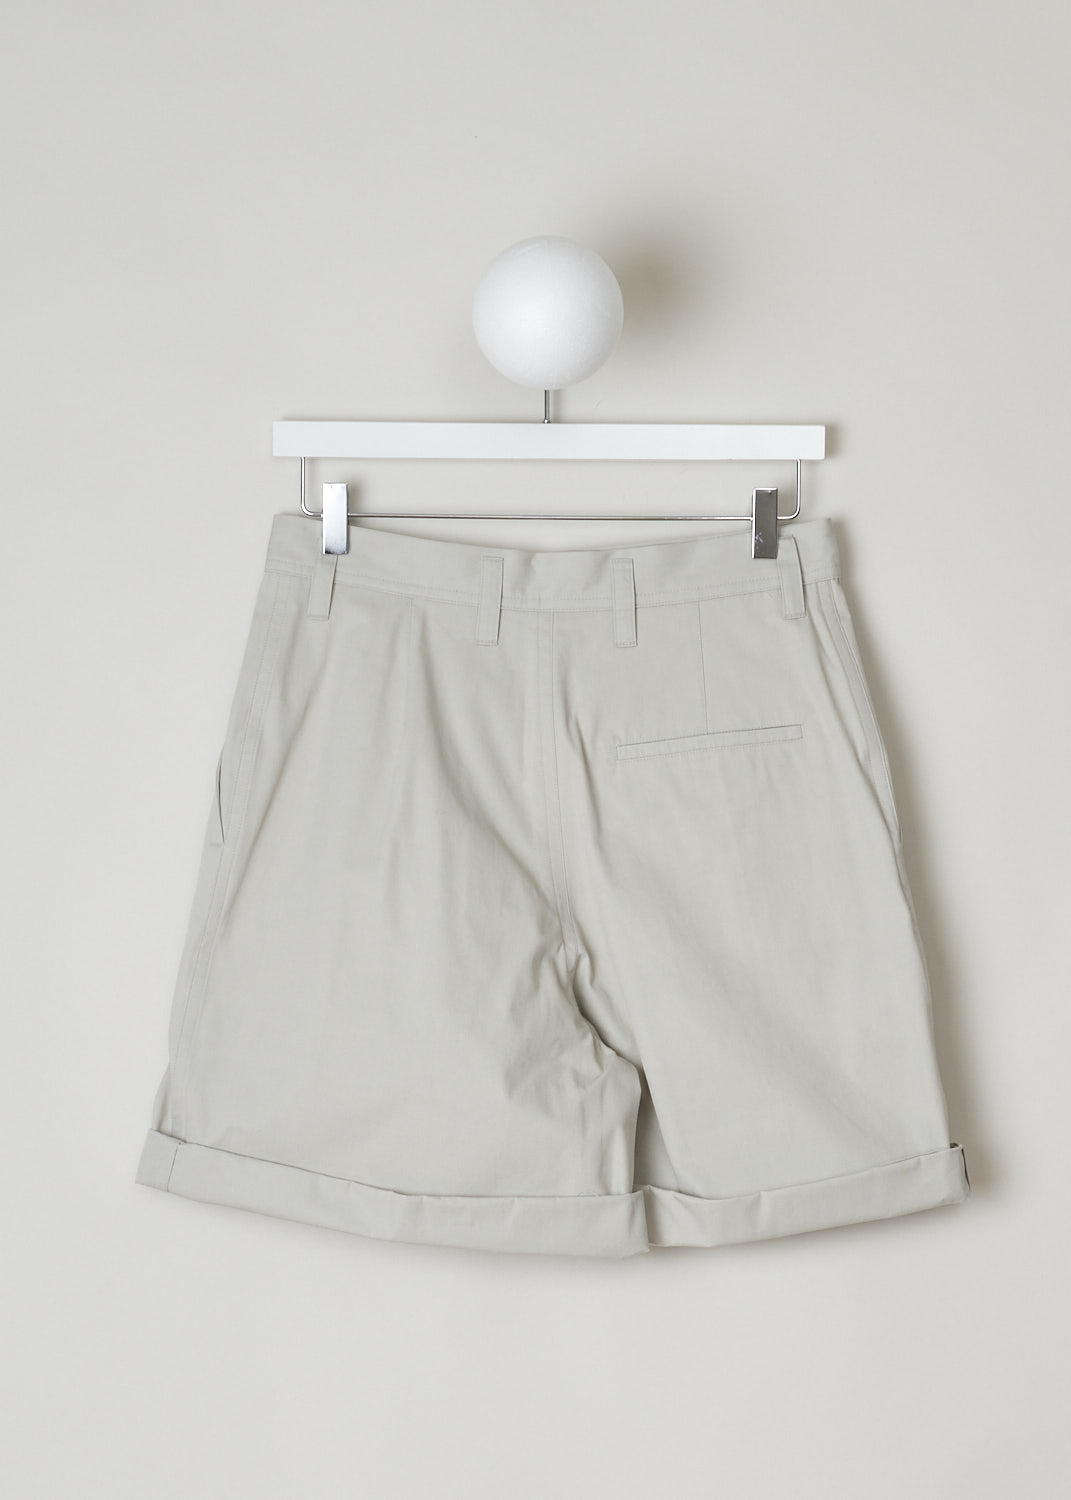 SOFIE Dâ€™HOORE, GREY HIGH-WAISTED SHORTS, PENNY_COSY_STONE, Grey, Back, These grey high-waisted shorts have belt loops and a concealed front button closure, with a single button visible on the waistband. These shorts have slanted pockets in the front and a single welt pocket in the back. The pant legs have a single box pleat and have a folded hem that can be unfolded.   
